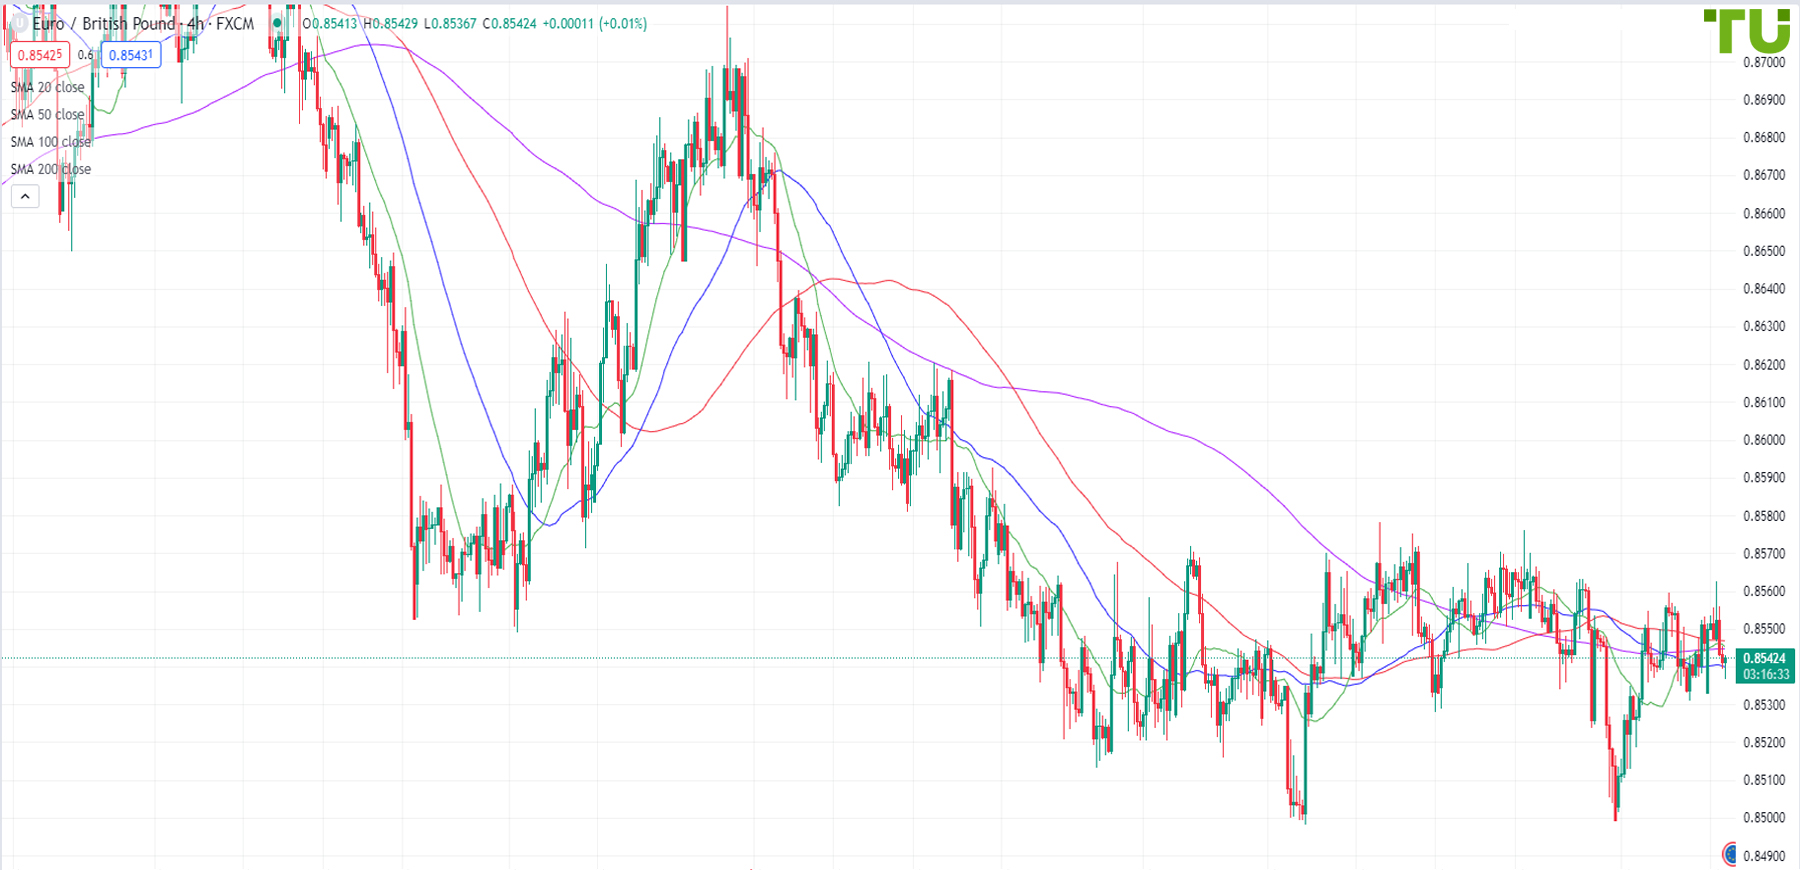 Euro/pound retreated again from resistance at 0.8560